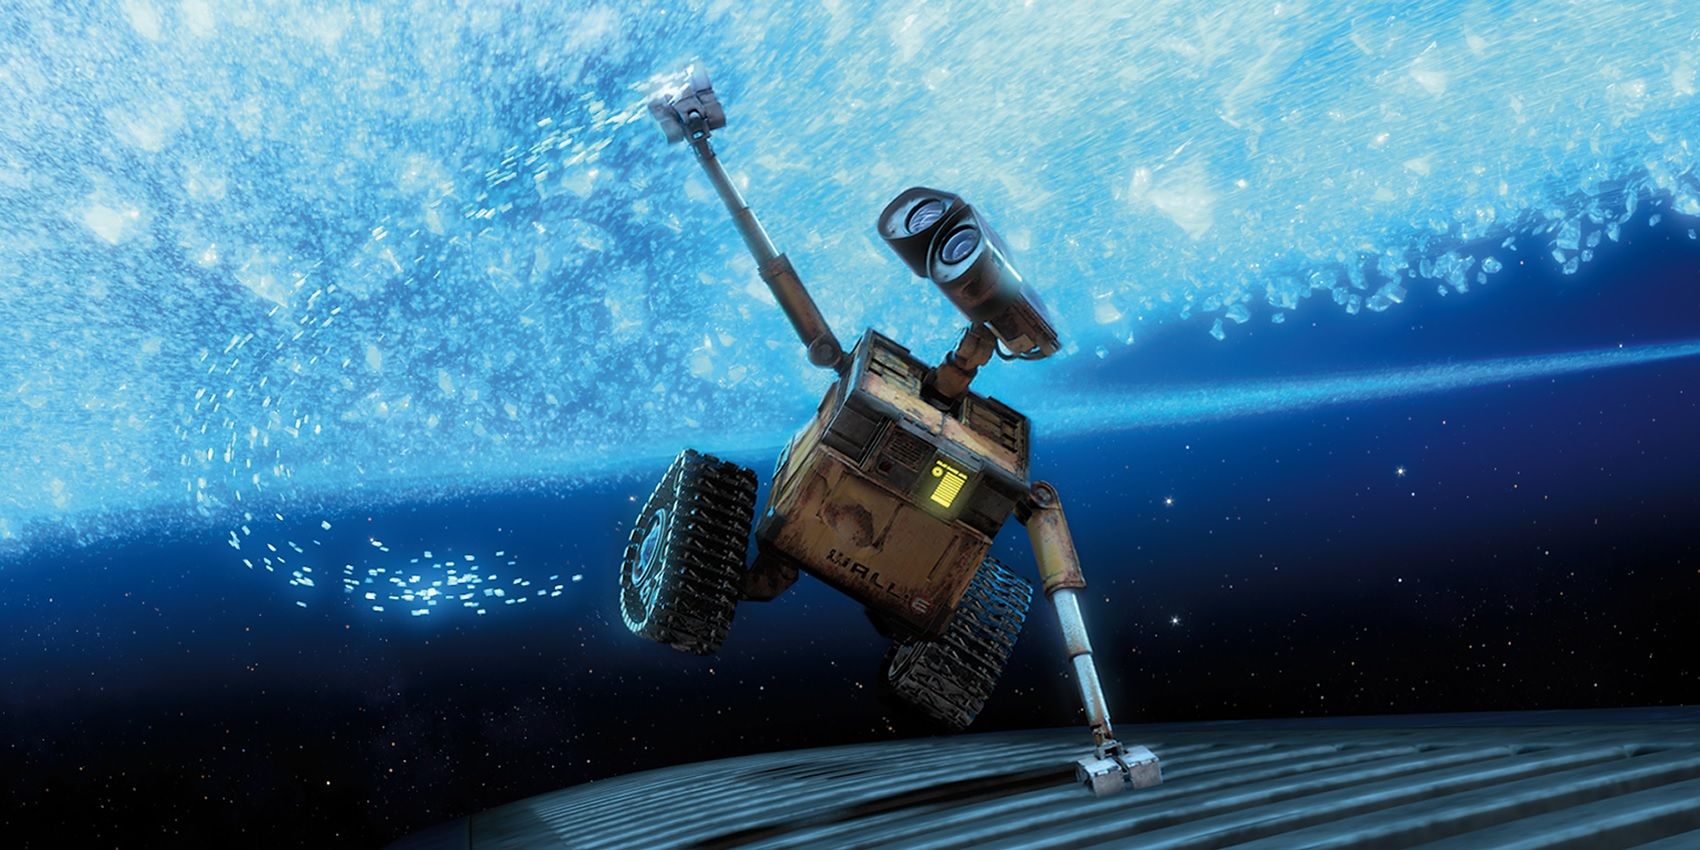 WALL-E soars through outer space